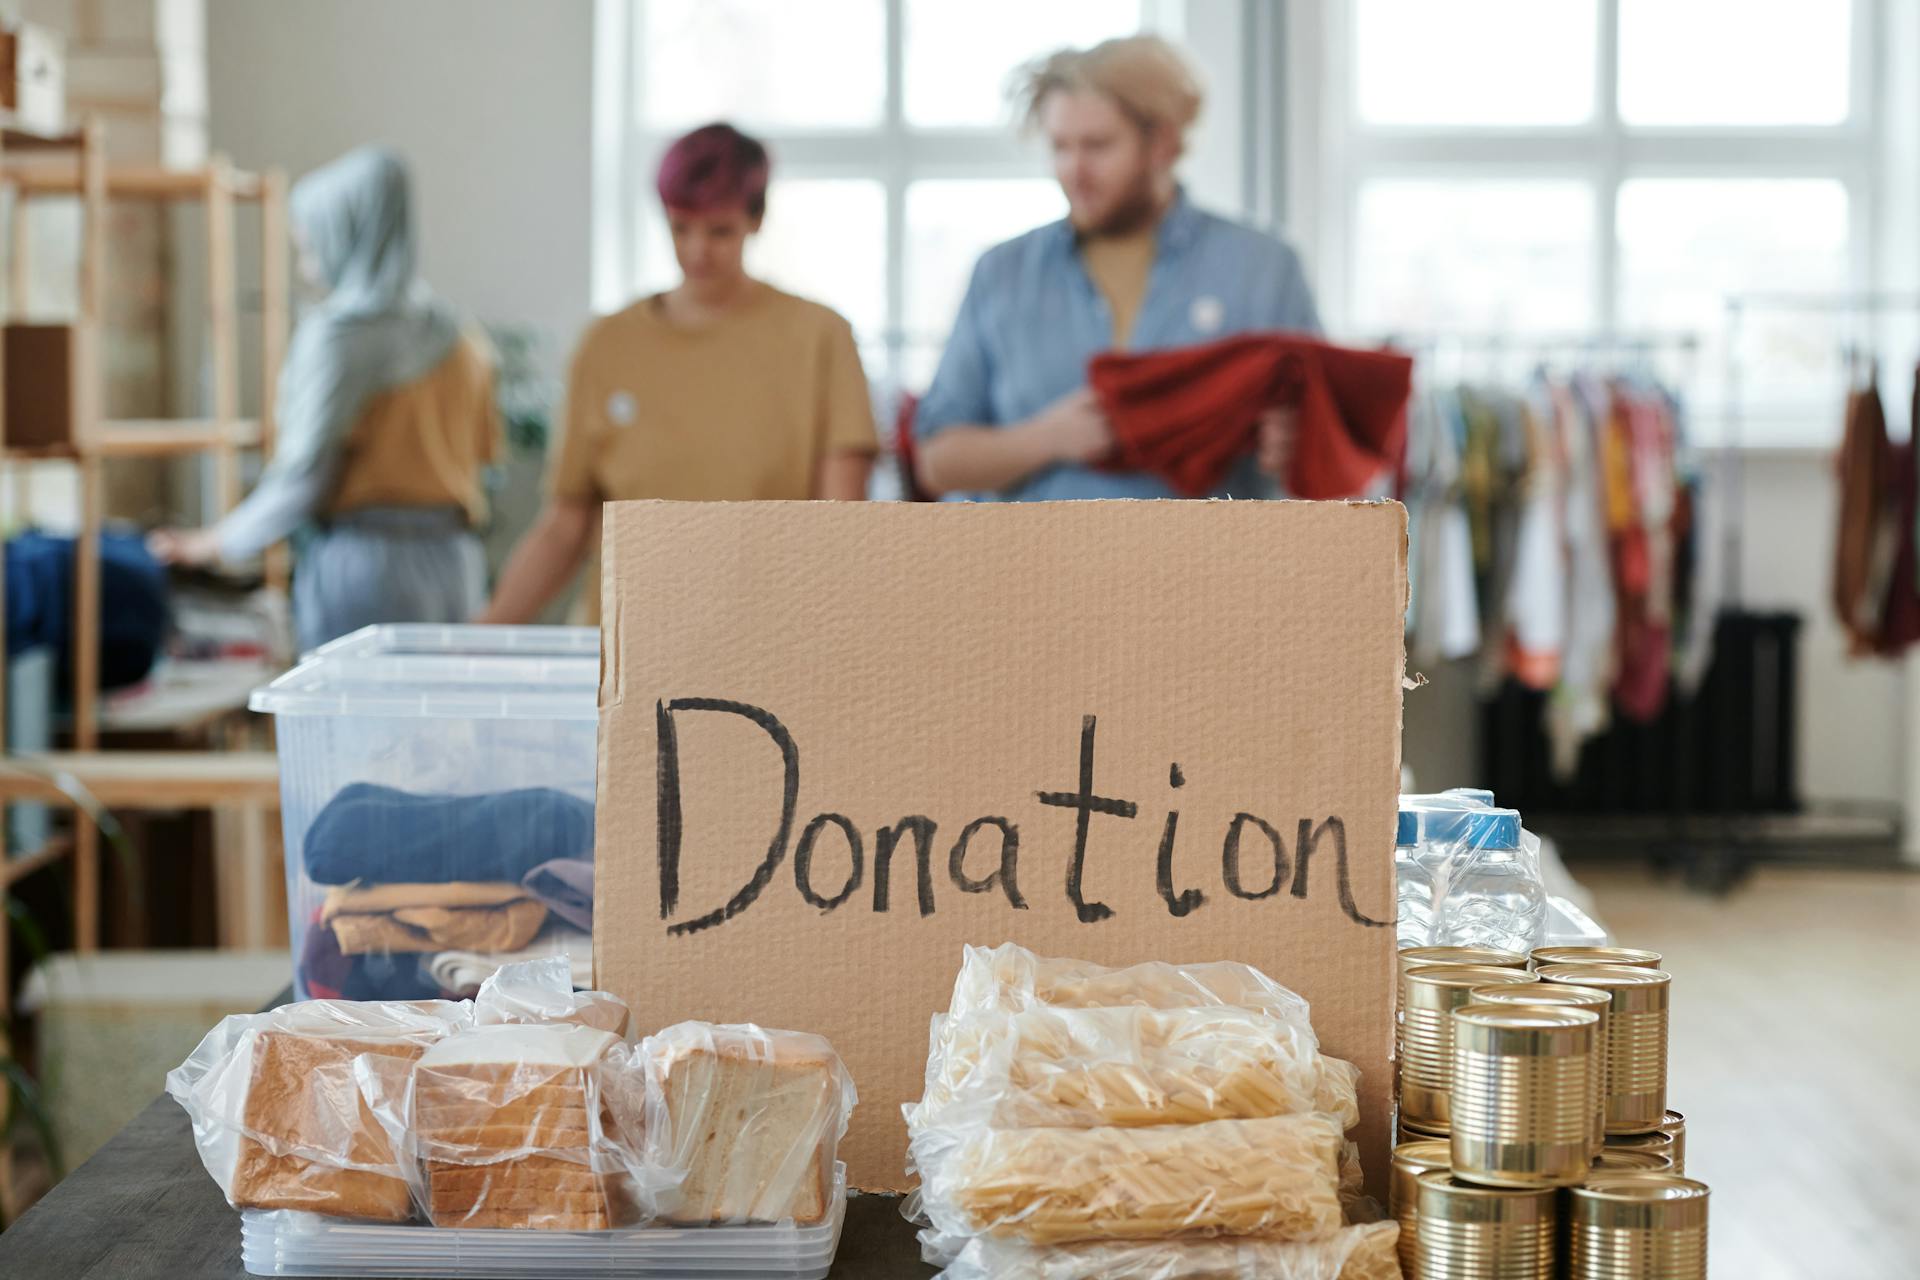 Boxes of food placed next to a cardboard inscription reading "Donation" | Source: Pexels